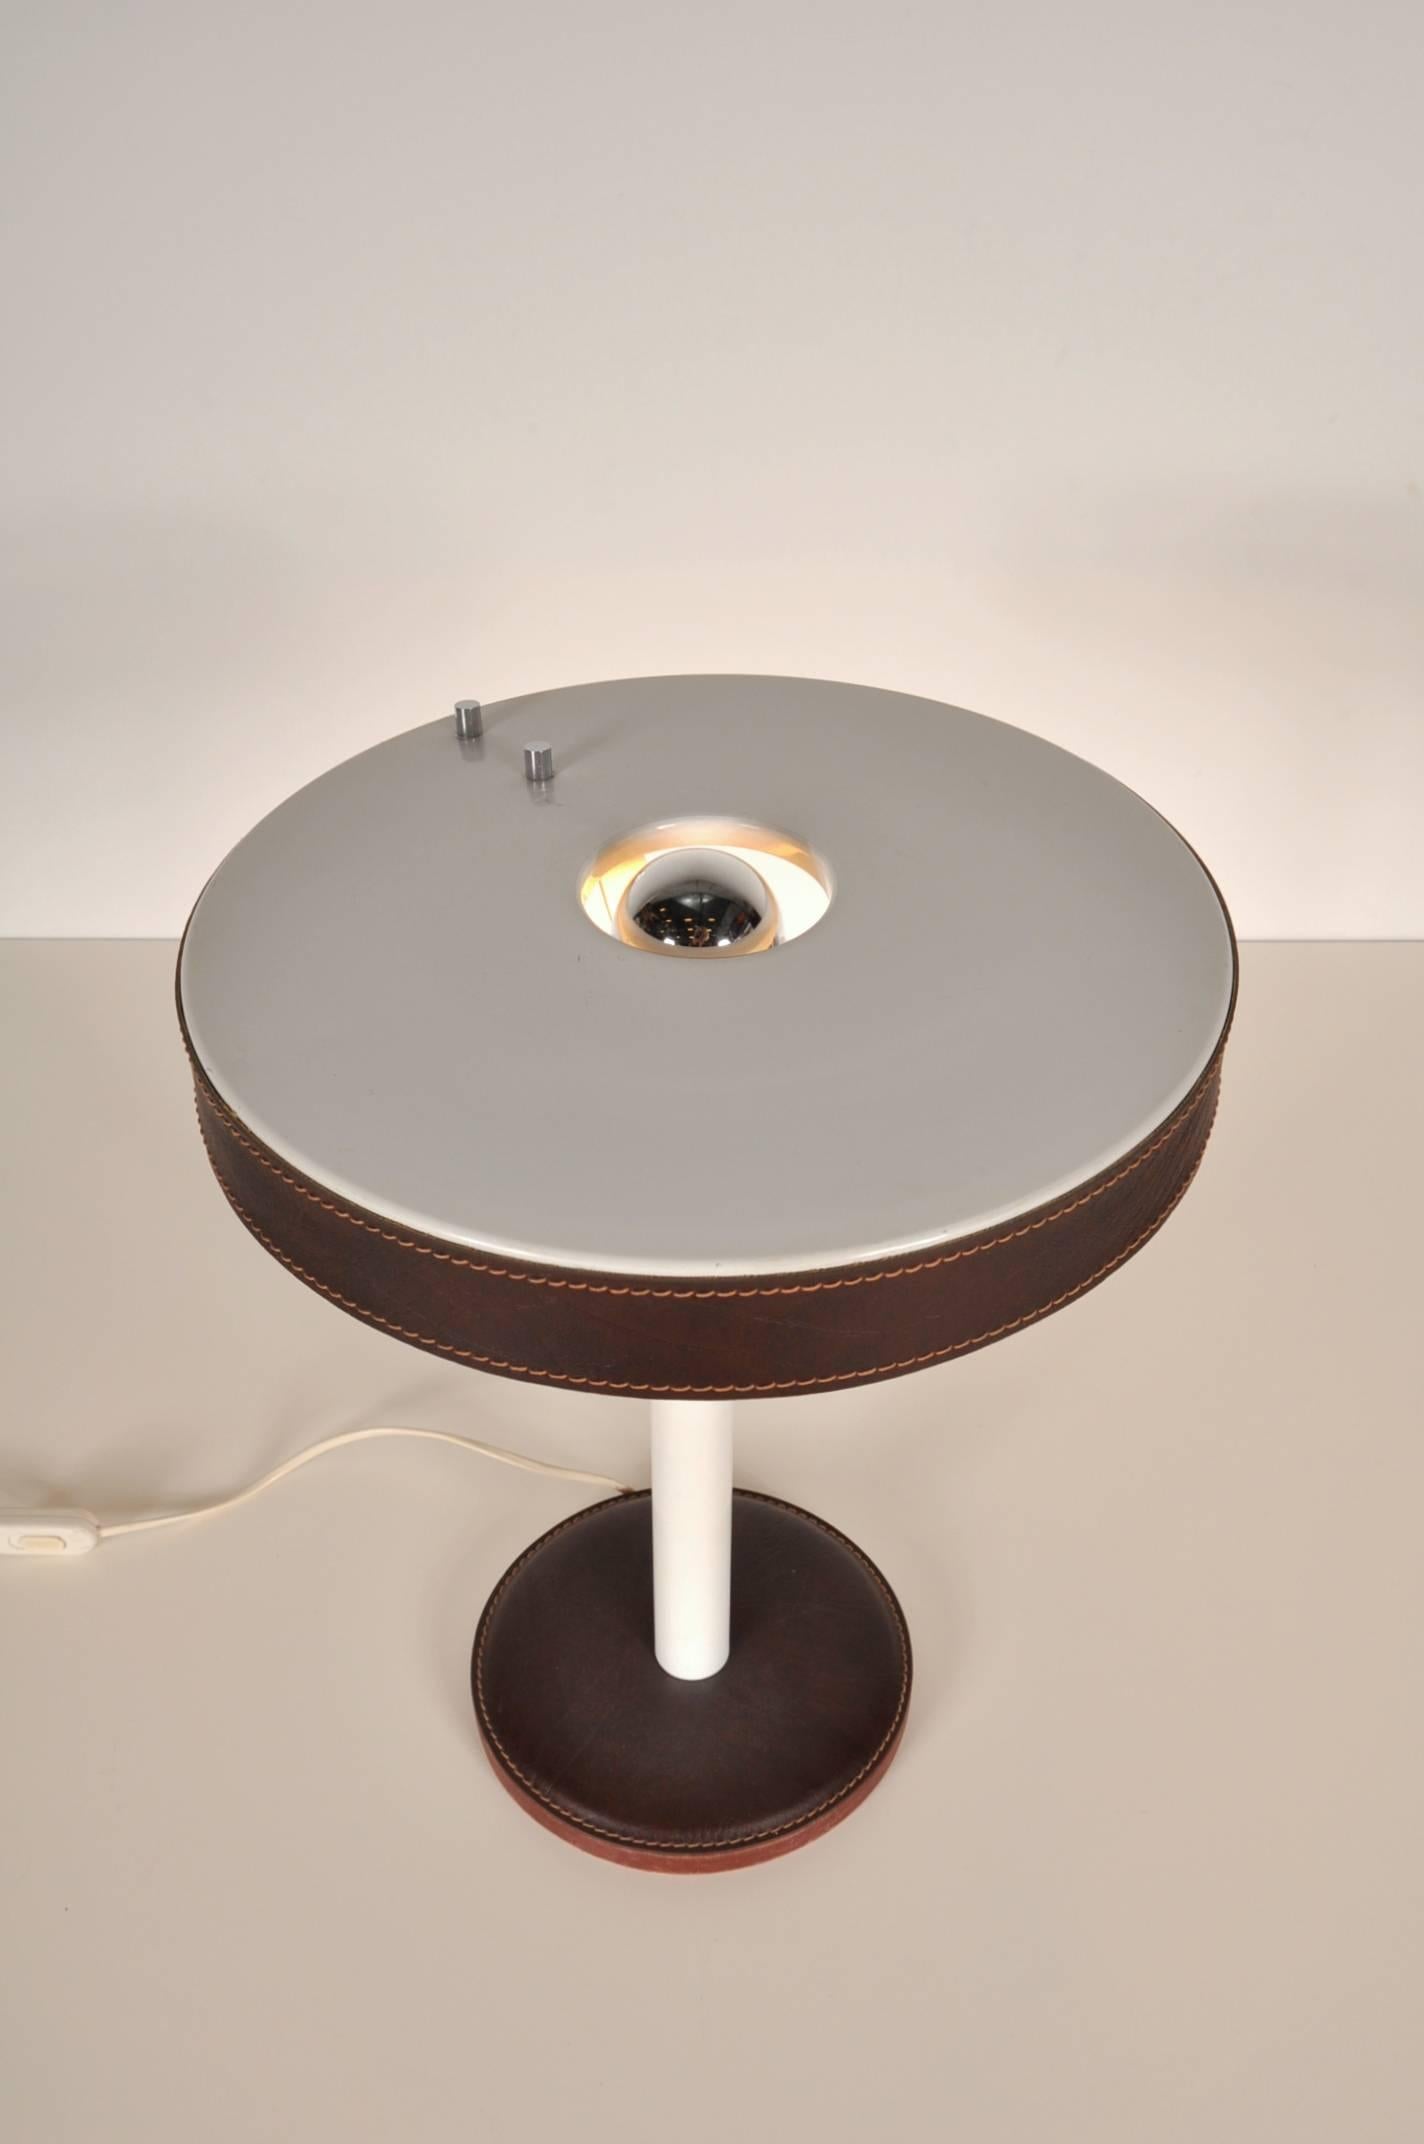 Beautiful table or desk lamp designed by Jacques Adnet in France, circa 1950.

The lamp is made of very well crafted stitched brown leather, making it a highly recognizable Adnet piece. The base is made of white metal, giving it an eye-catching